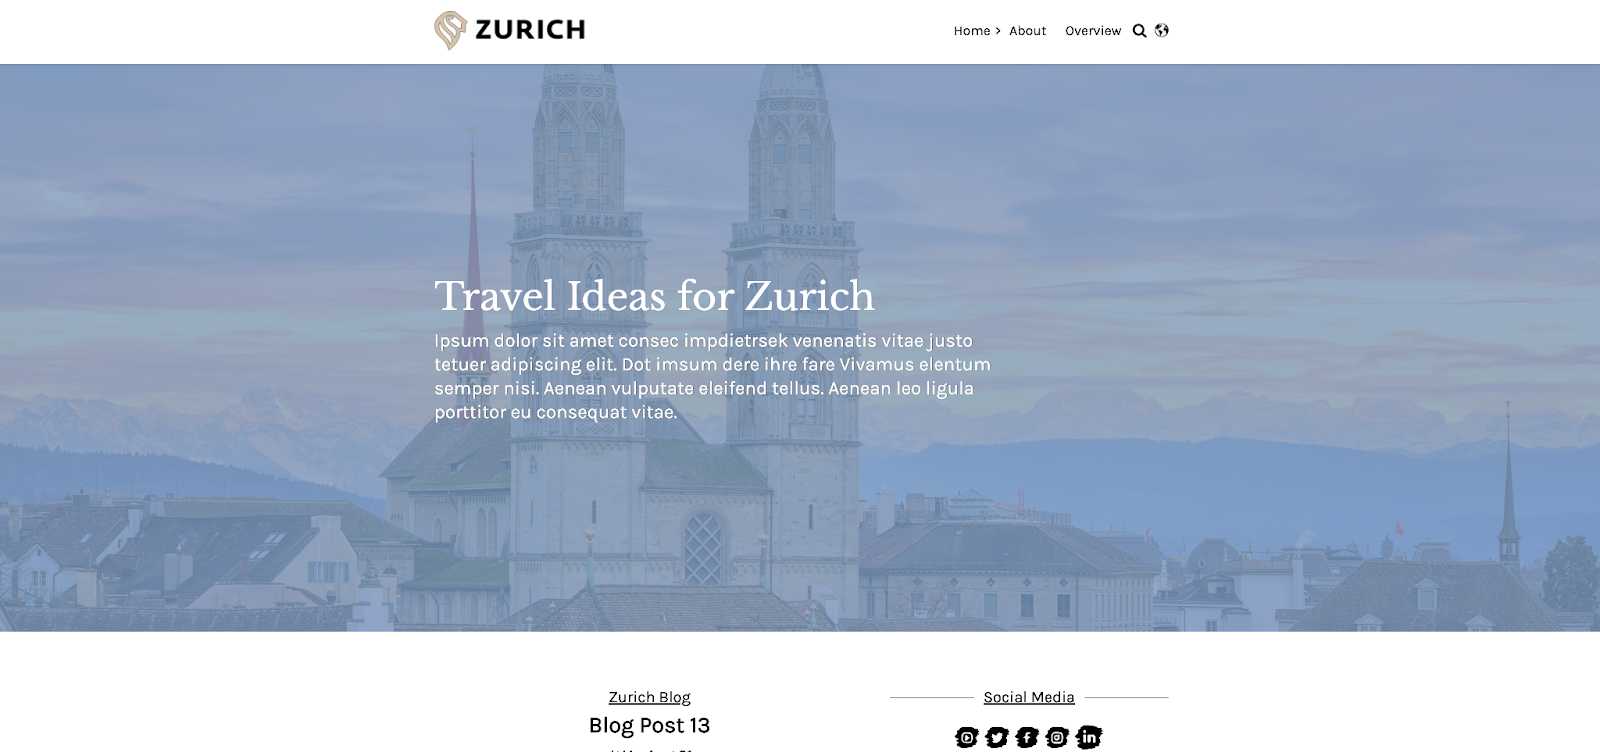 Zurich is a theme for bloggers and influencers that can help you grow your audience with HubSpot’s powerful tools backing it up